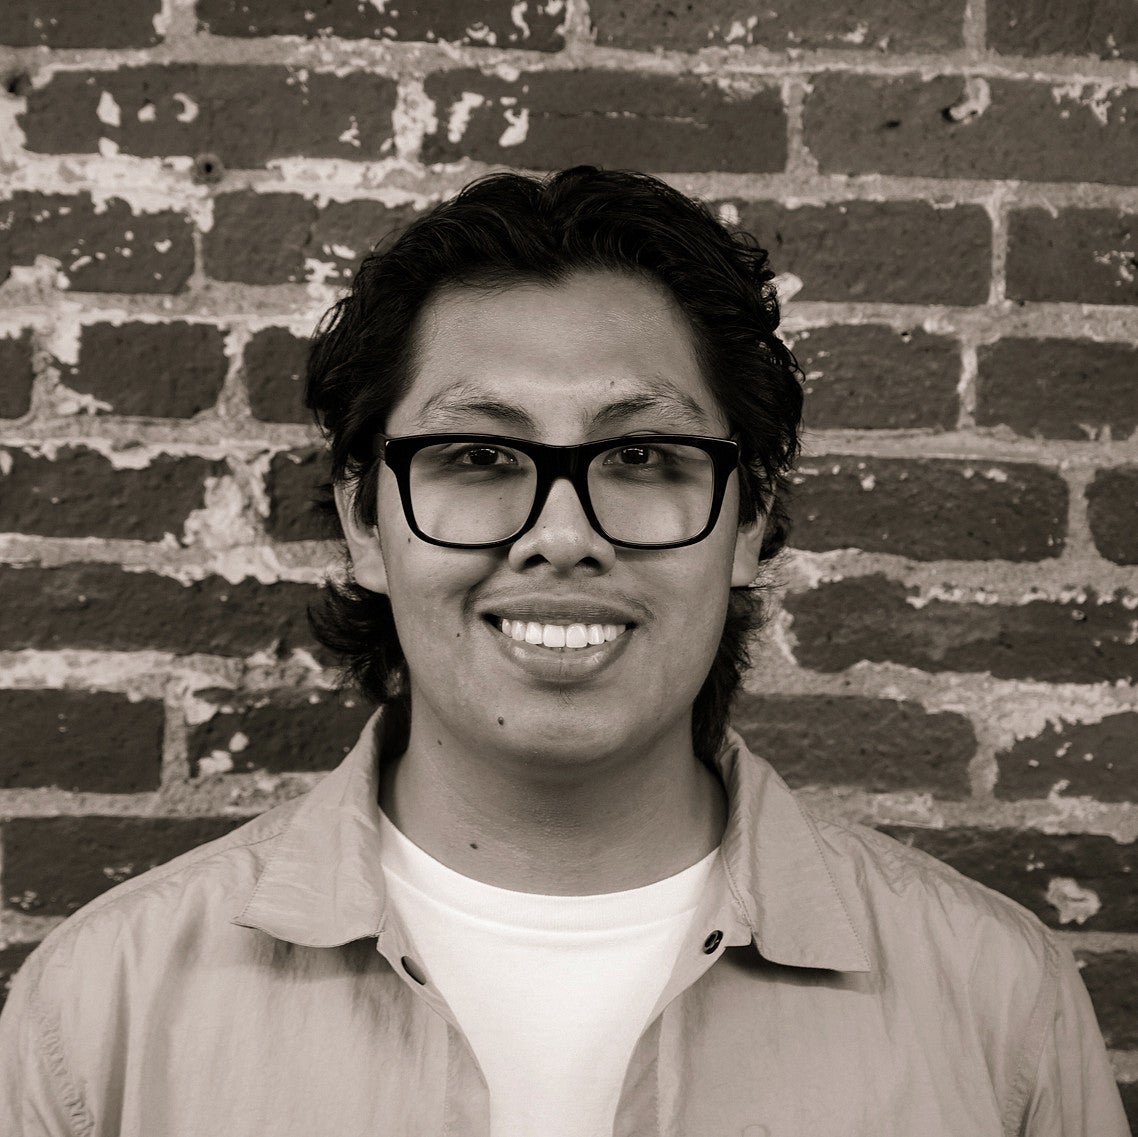 Photograph of a smiling first-year SPD student, Benjamen Lemus, in front of a brick wall.